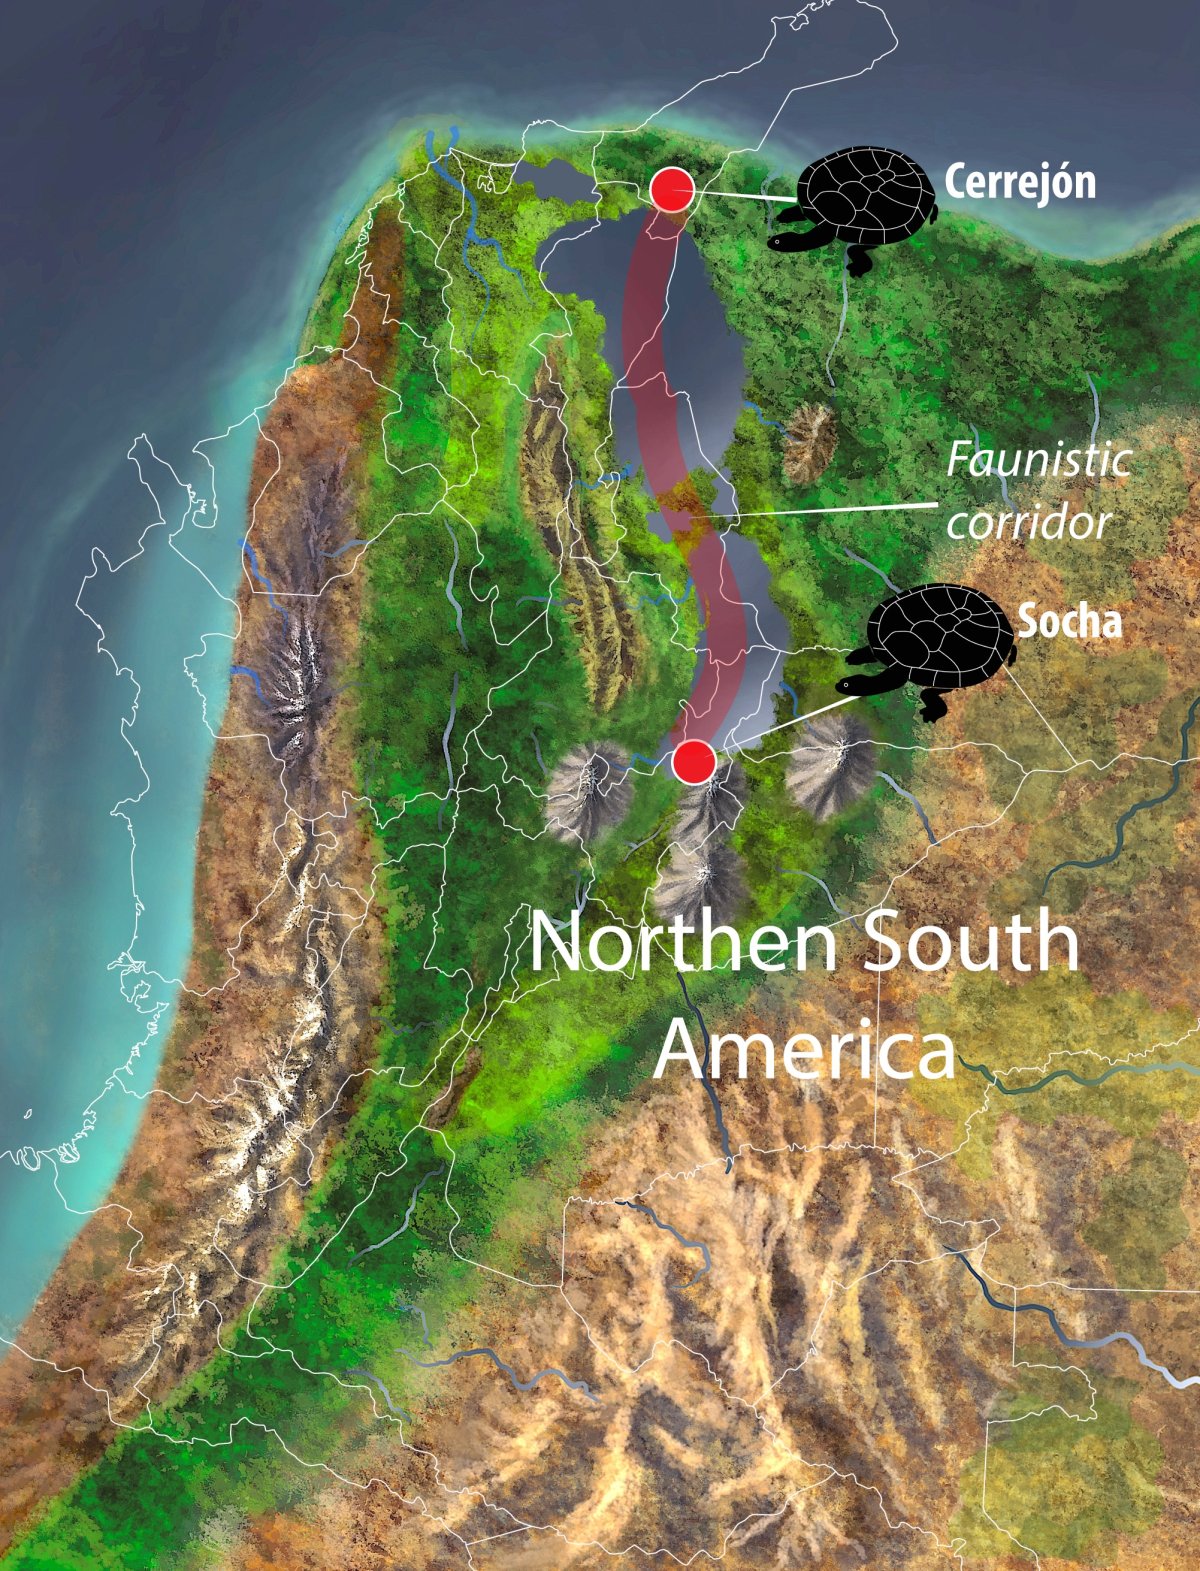 The paleoenvironment of northern South America